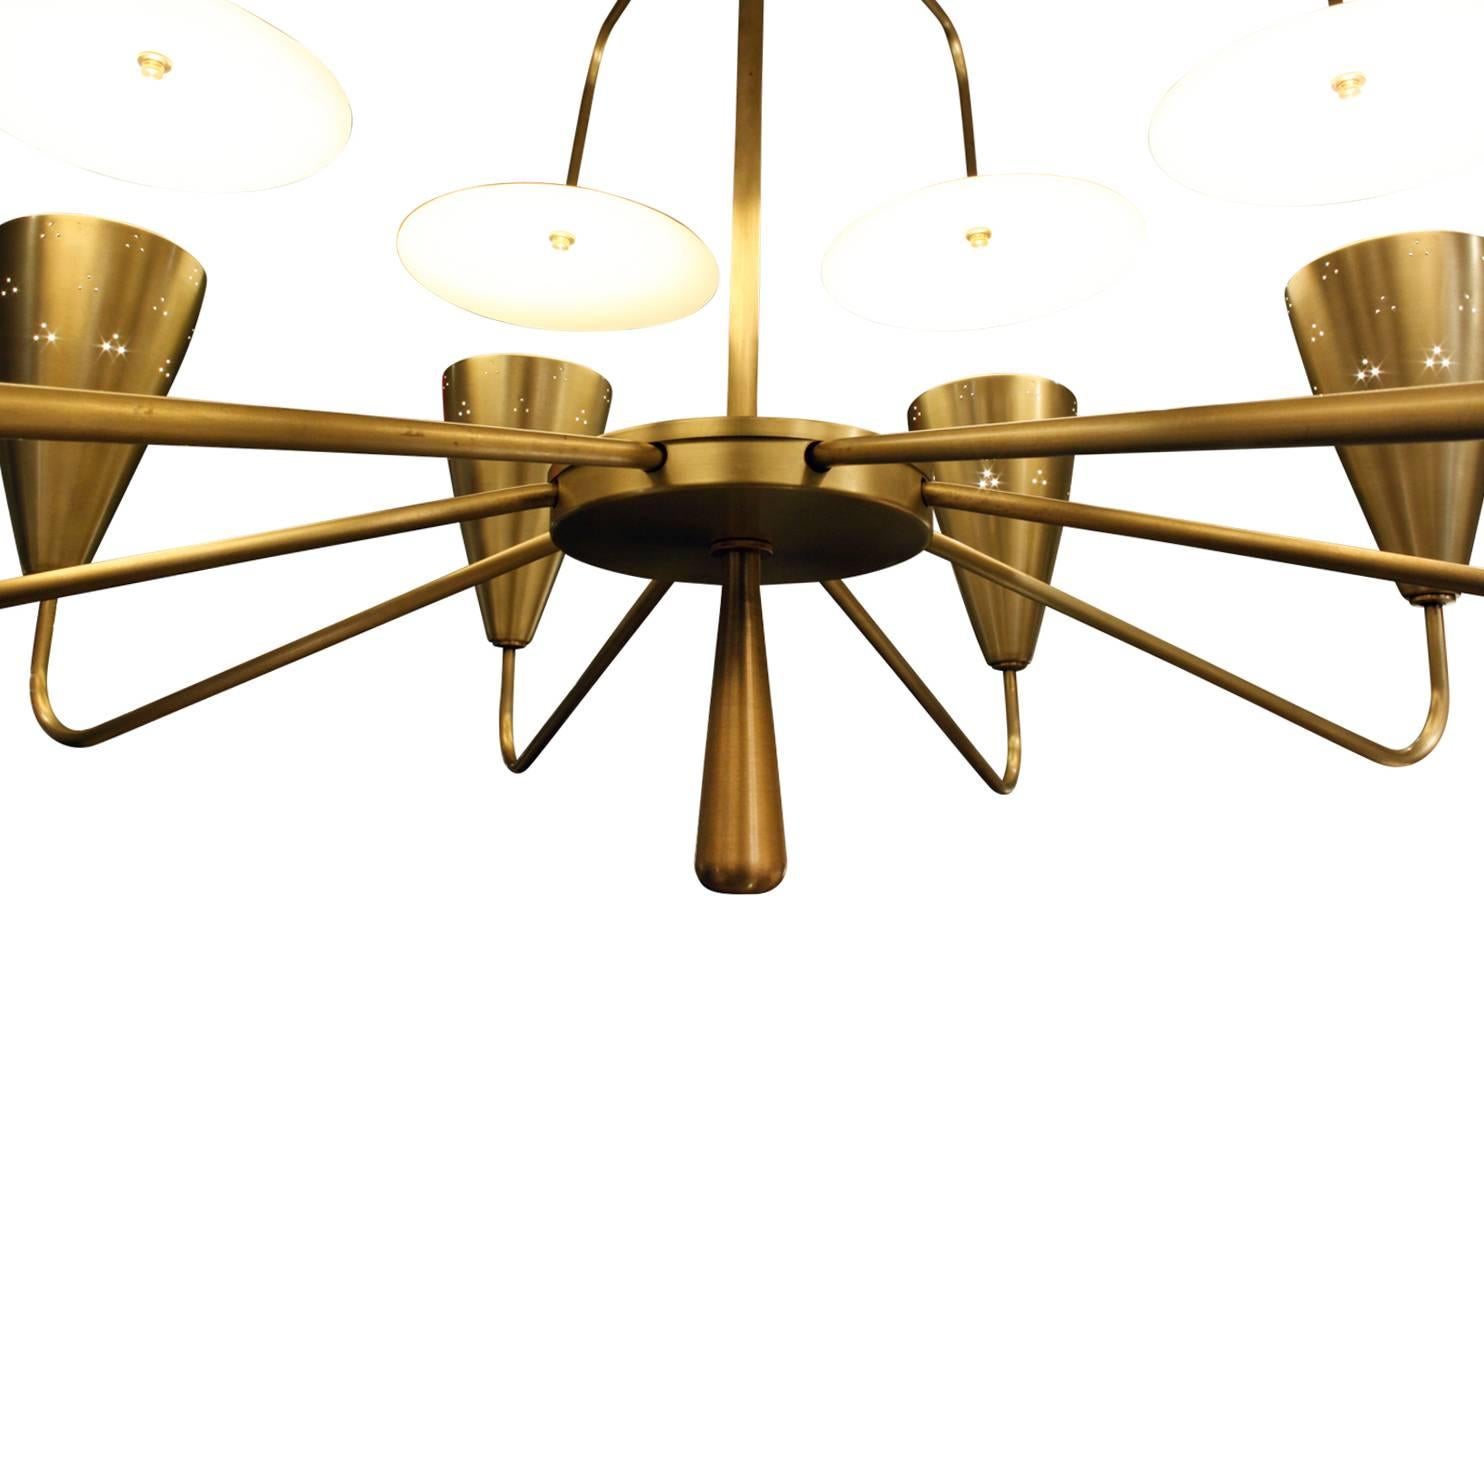 Hand-Crafted Large Sculptural Eight Arm Brass Chandelier, 1950s